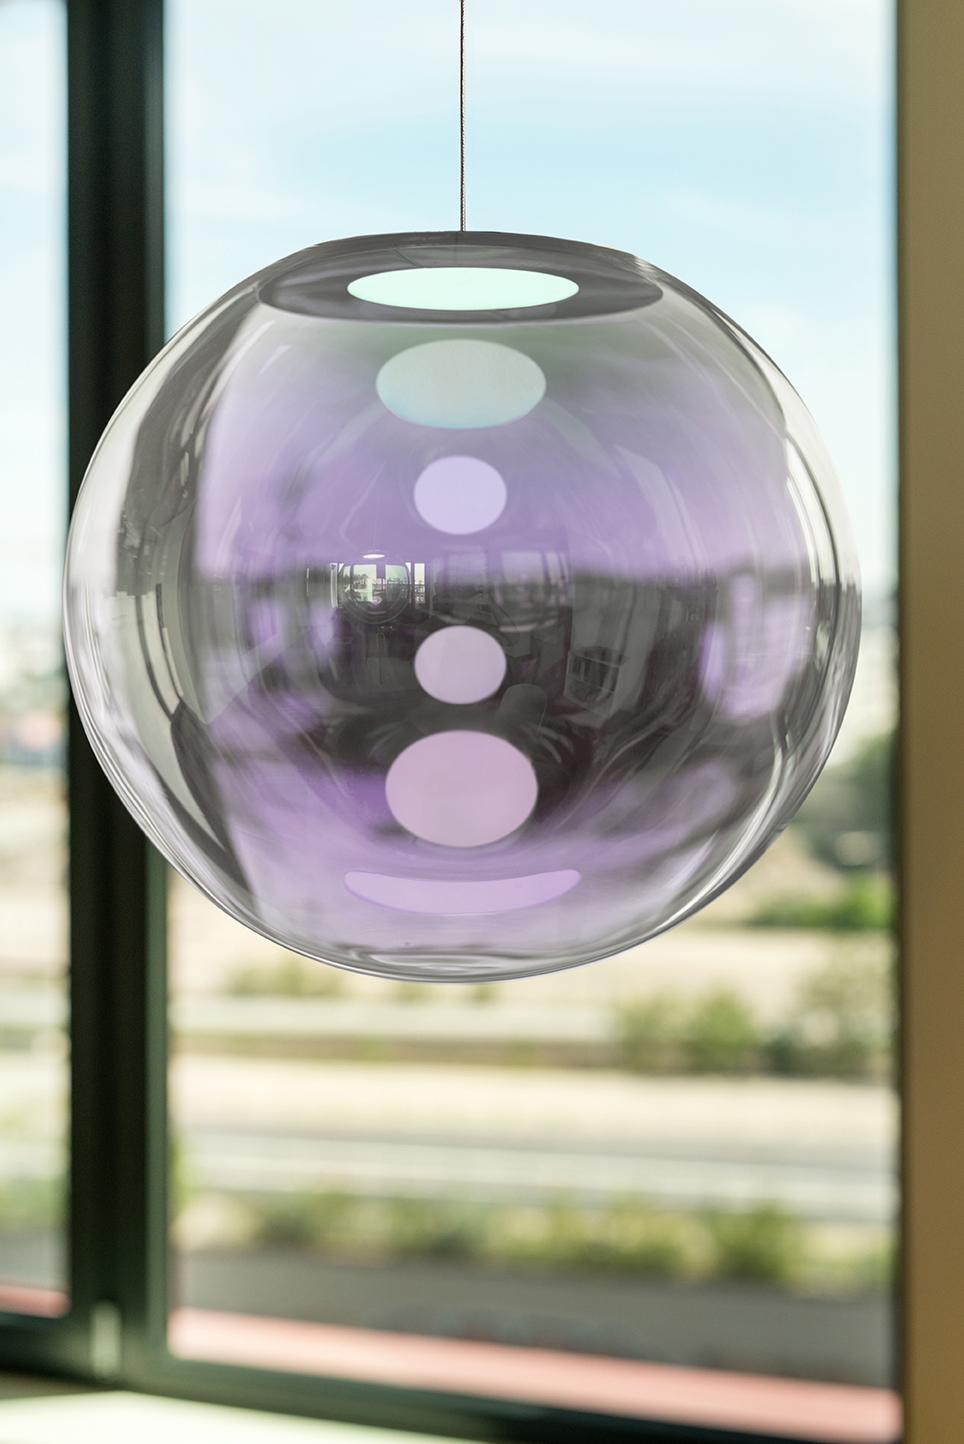 Silver-Lilac Iris Globe 40 by Sebastian Scherer
Handmade
Dimensions: Ø 40cm.
Design: Sebastian Scherer
Material: Dichroic-coated mouth-blown glass, stainless steel.
Color: Silver-lilac.

Available in gold-indigo, blue-orange, pink-green,